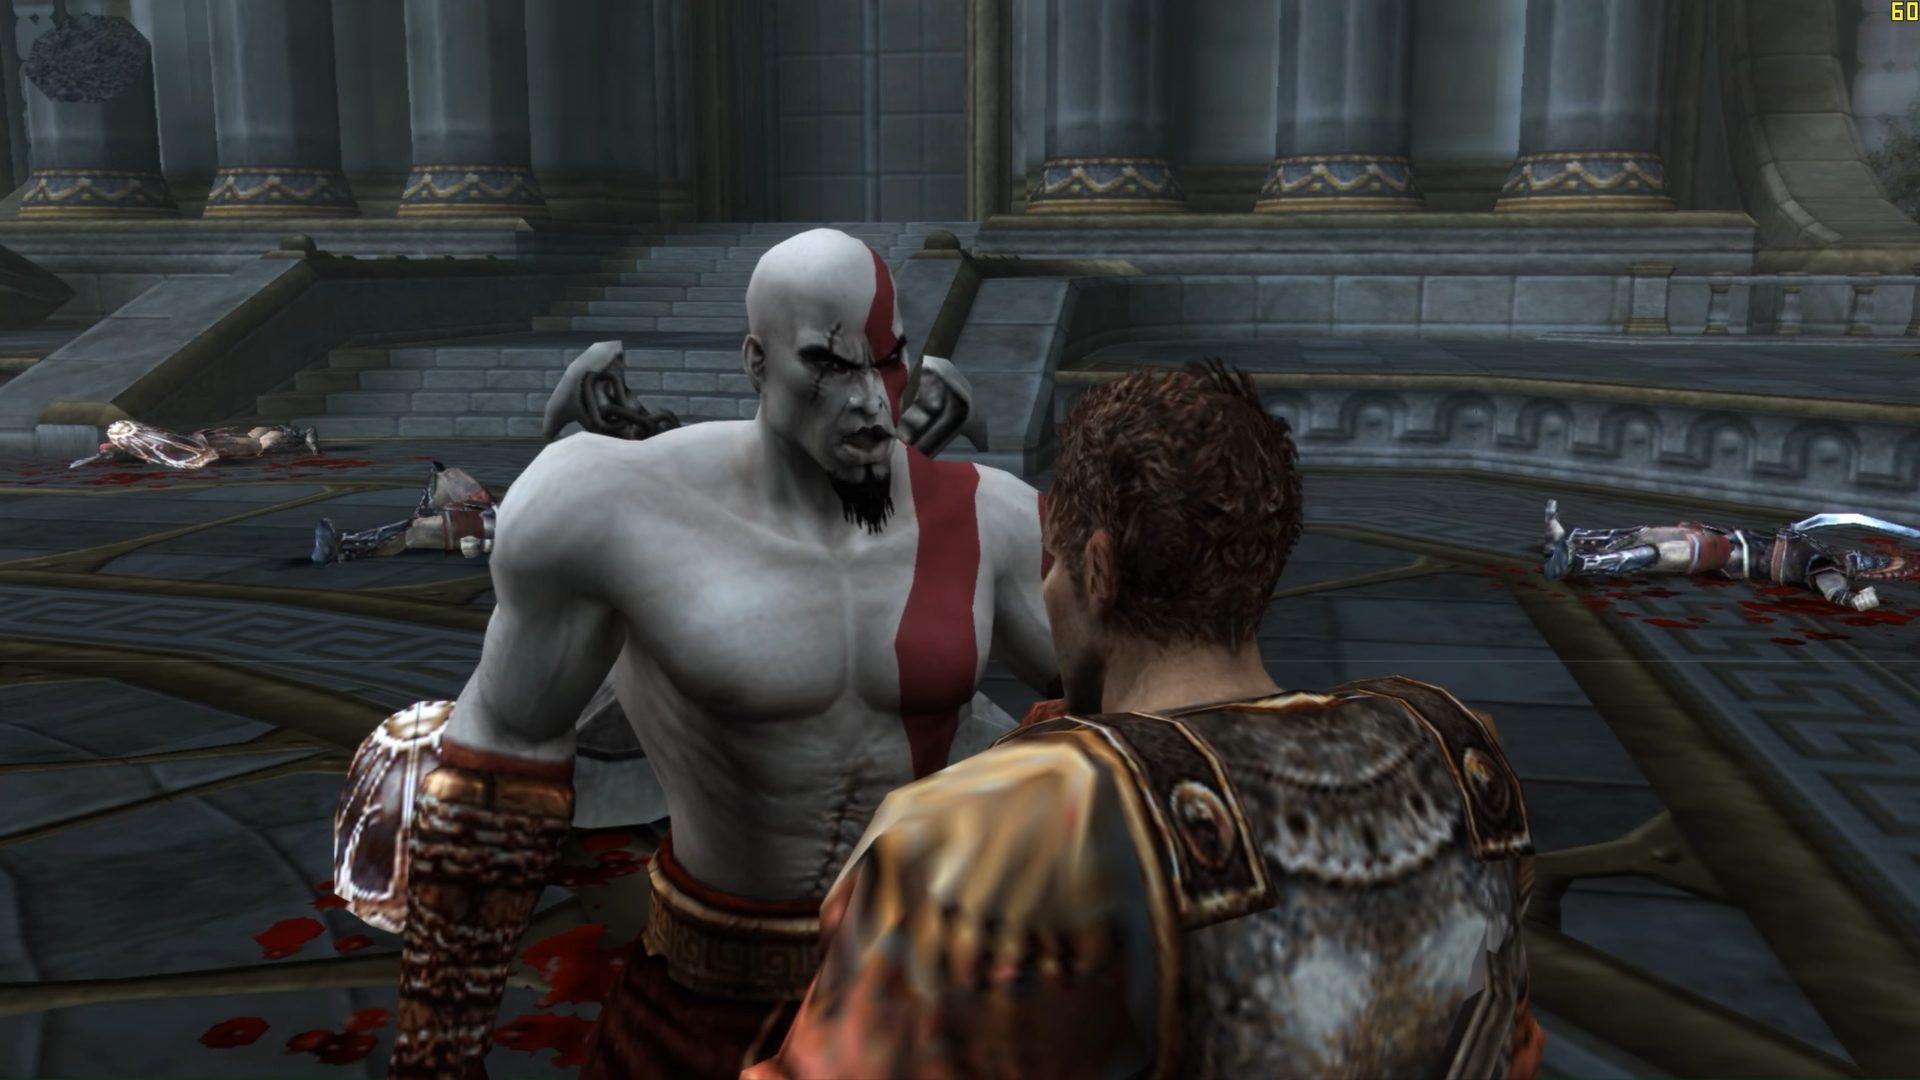 God of War II - PS2 ROM & ISO Game Download